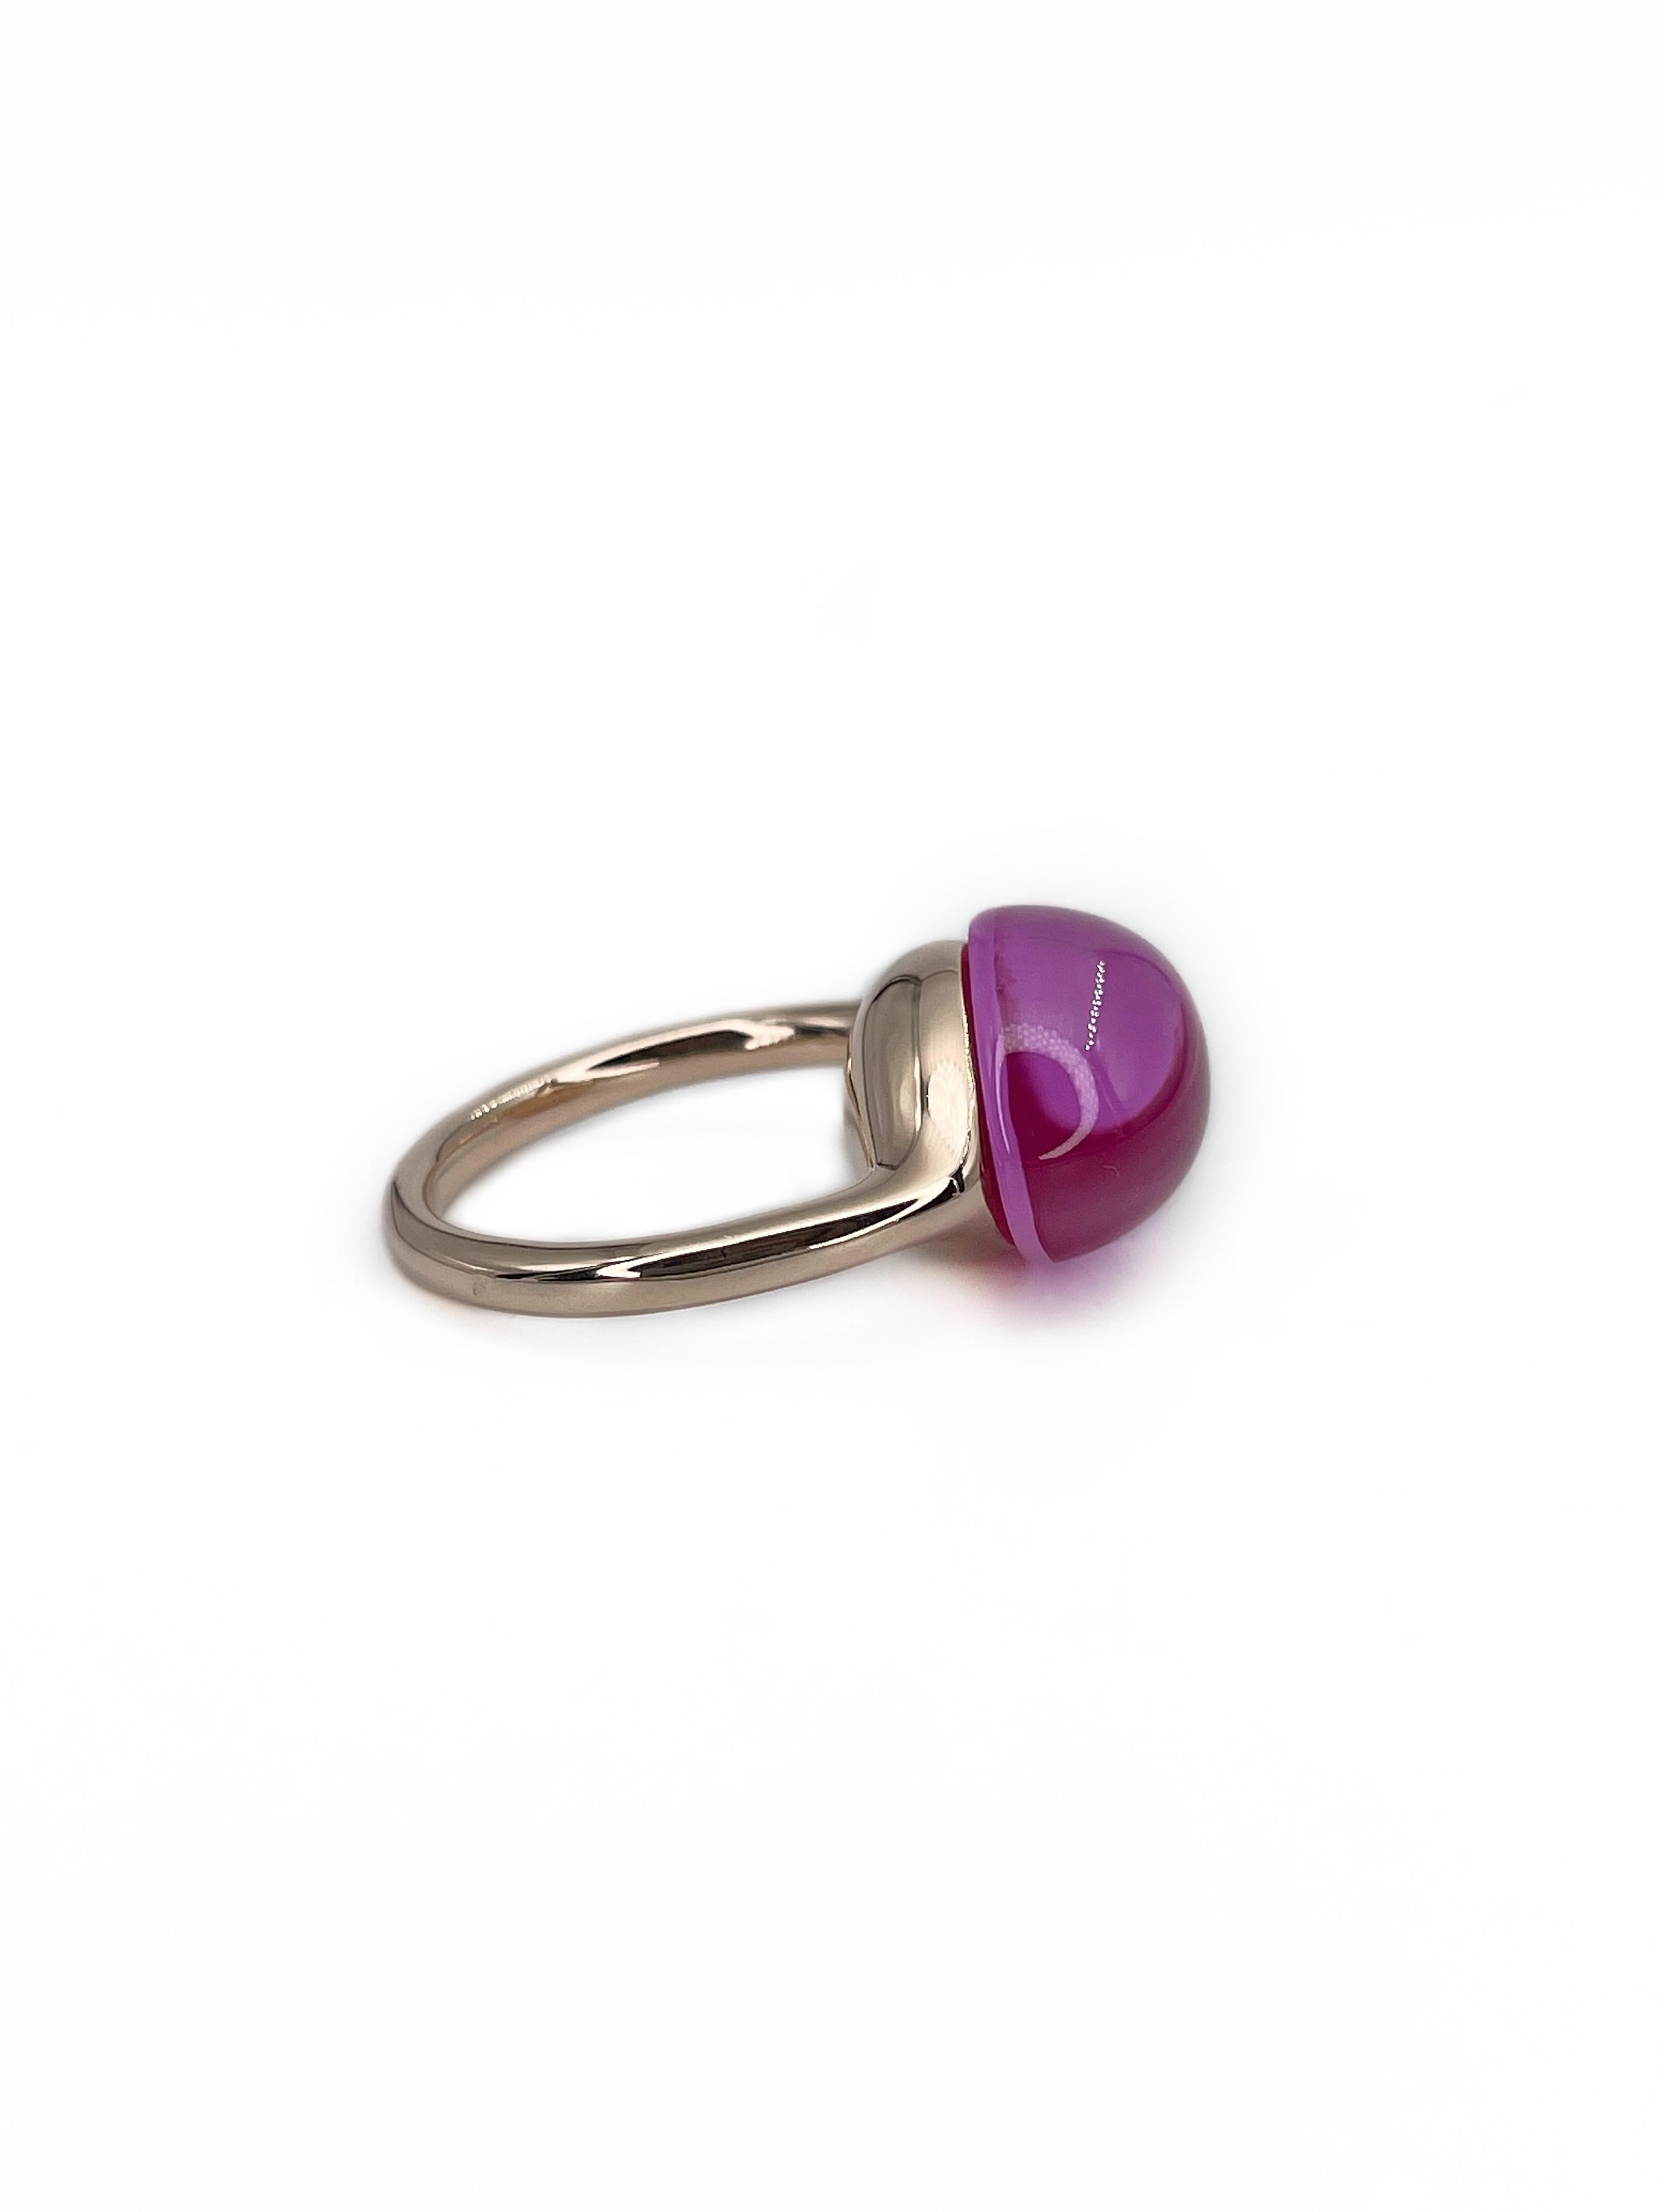 This is a Pomellato “Rouge Passion” iconic collection ring crafted in 9K gold. It is set with a fabulous synthetic pink cabochon cut sapphire.  

Signed: “Pomellato C130024369”

Weight: 7.12g
Size: 15.5 (US4.75)